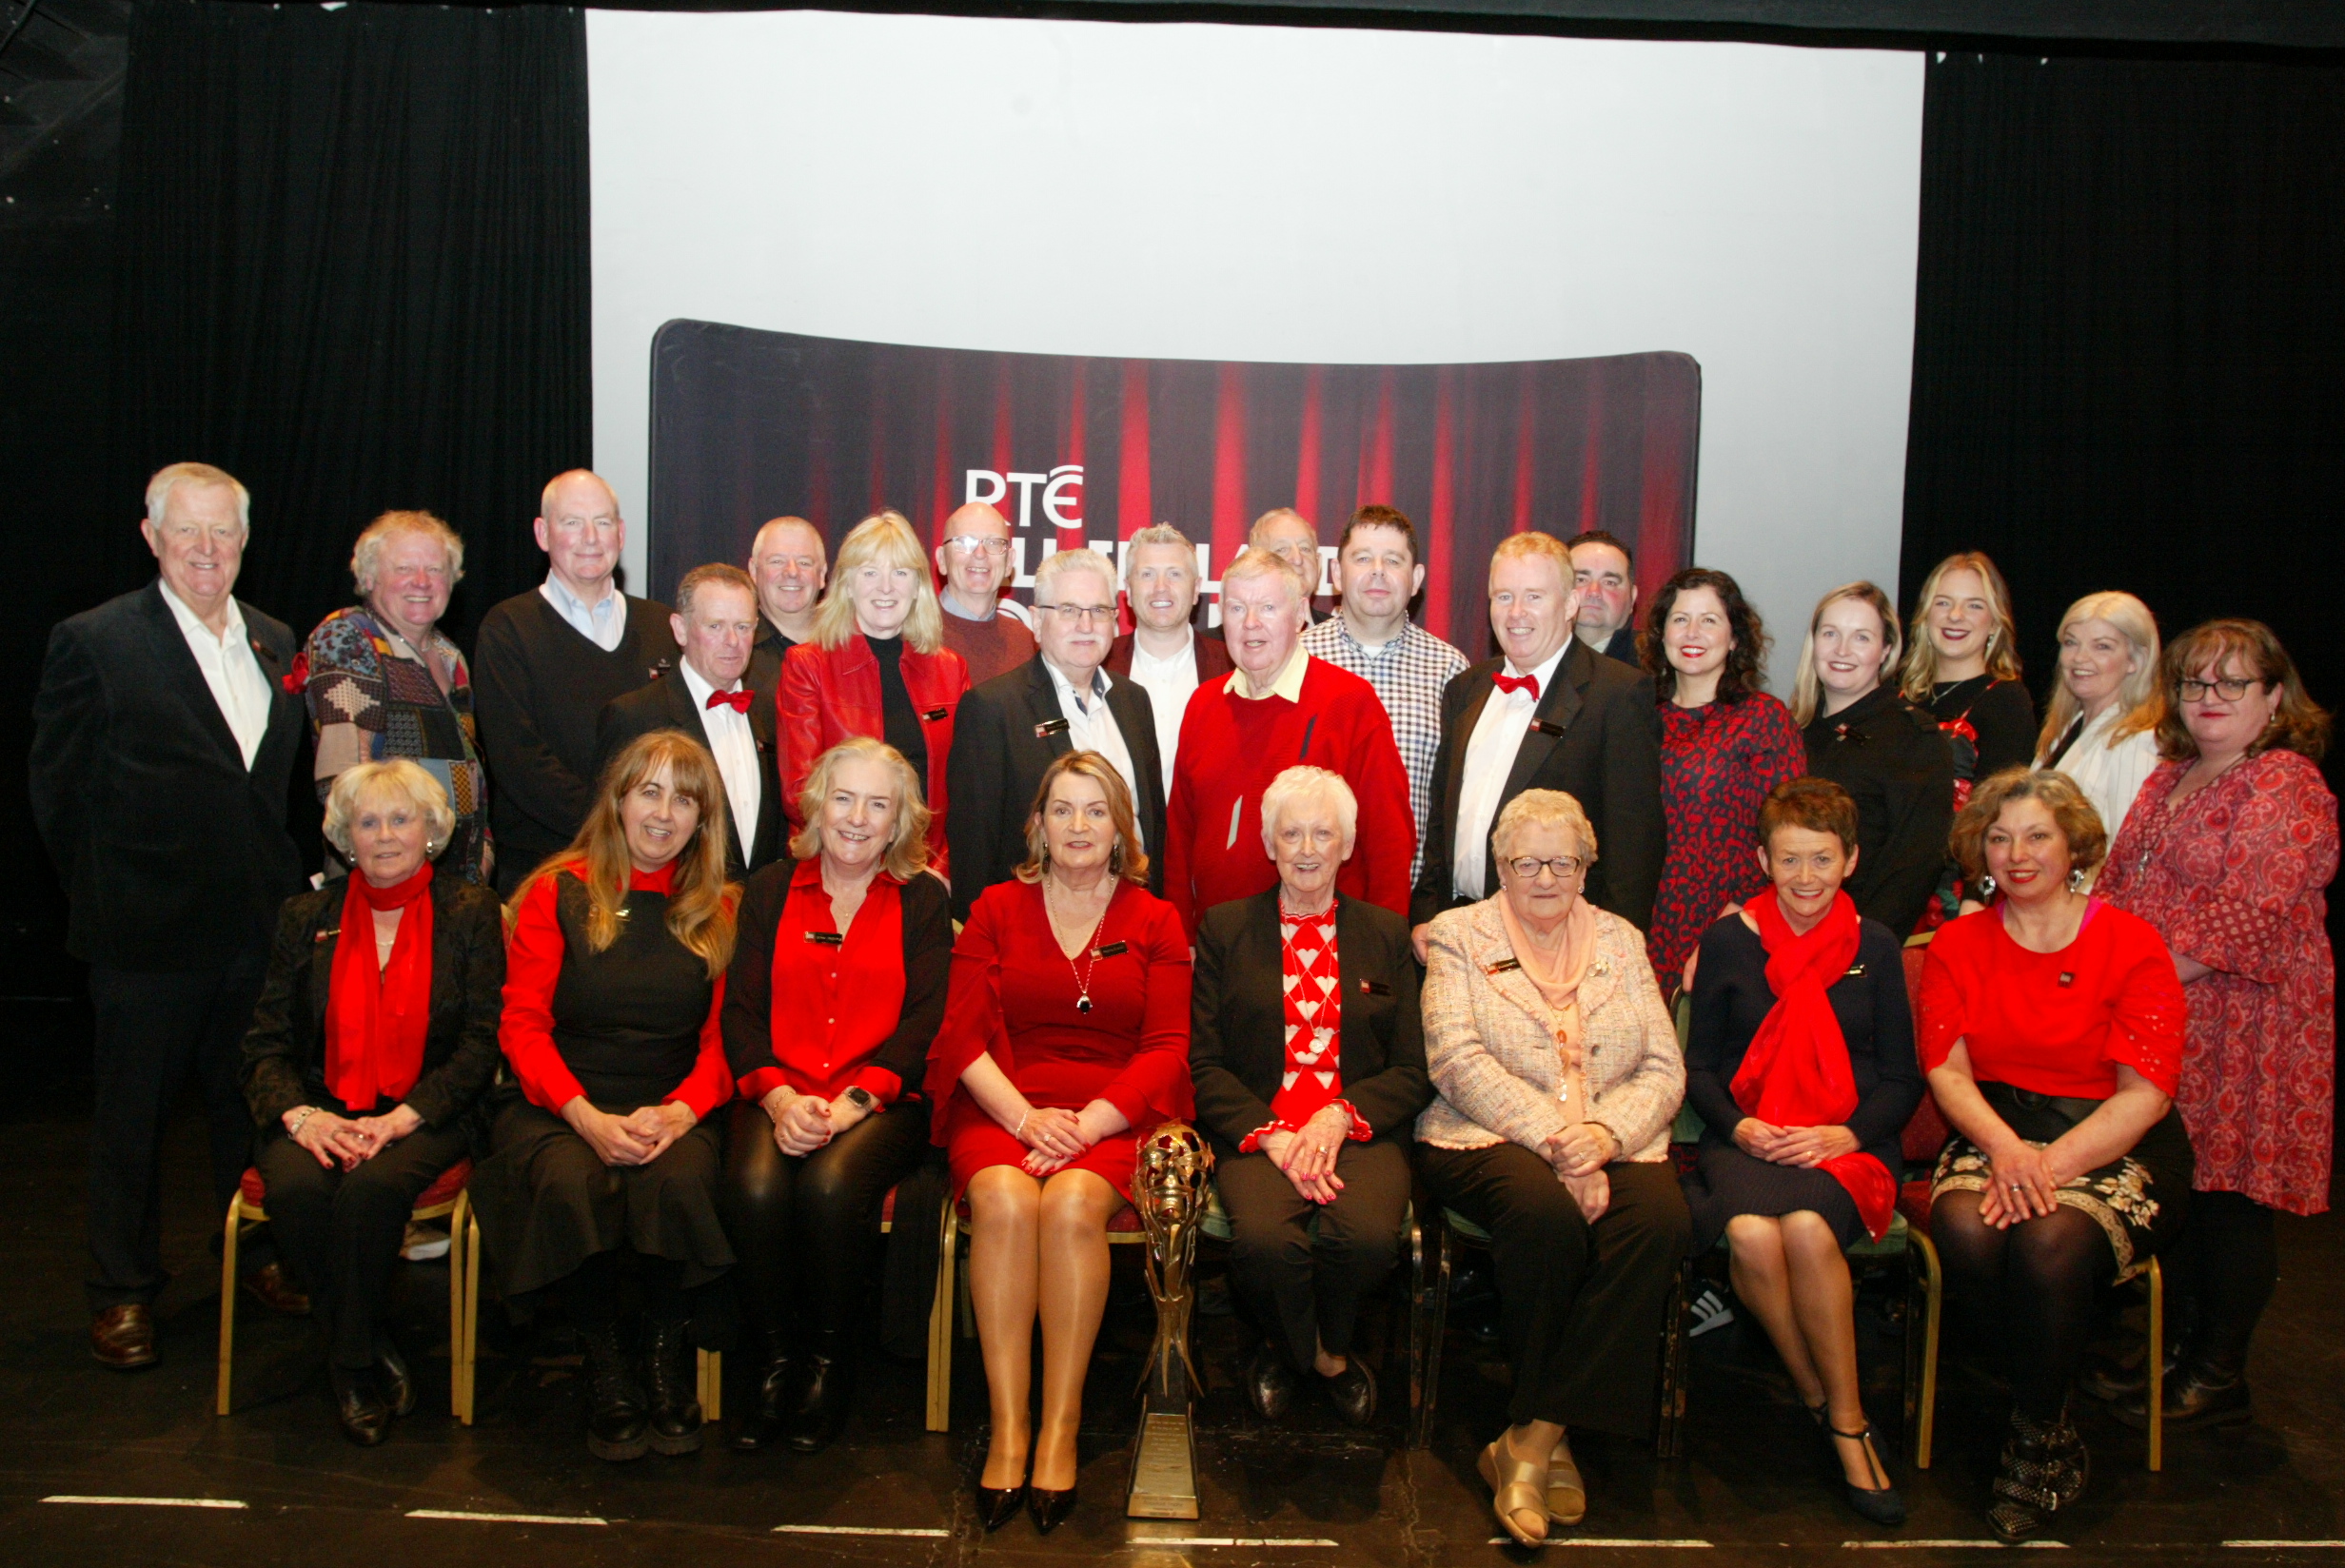 RTÉ All Ireland Drama Festival committee group picture